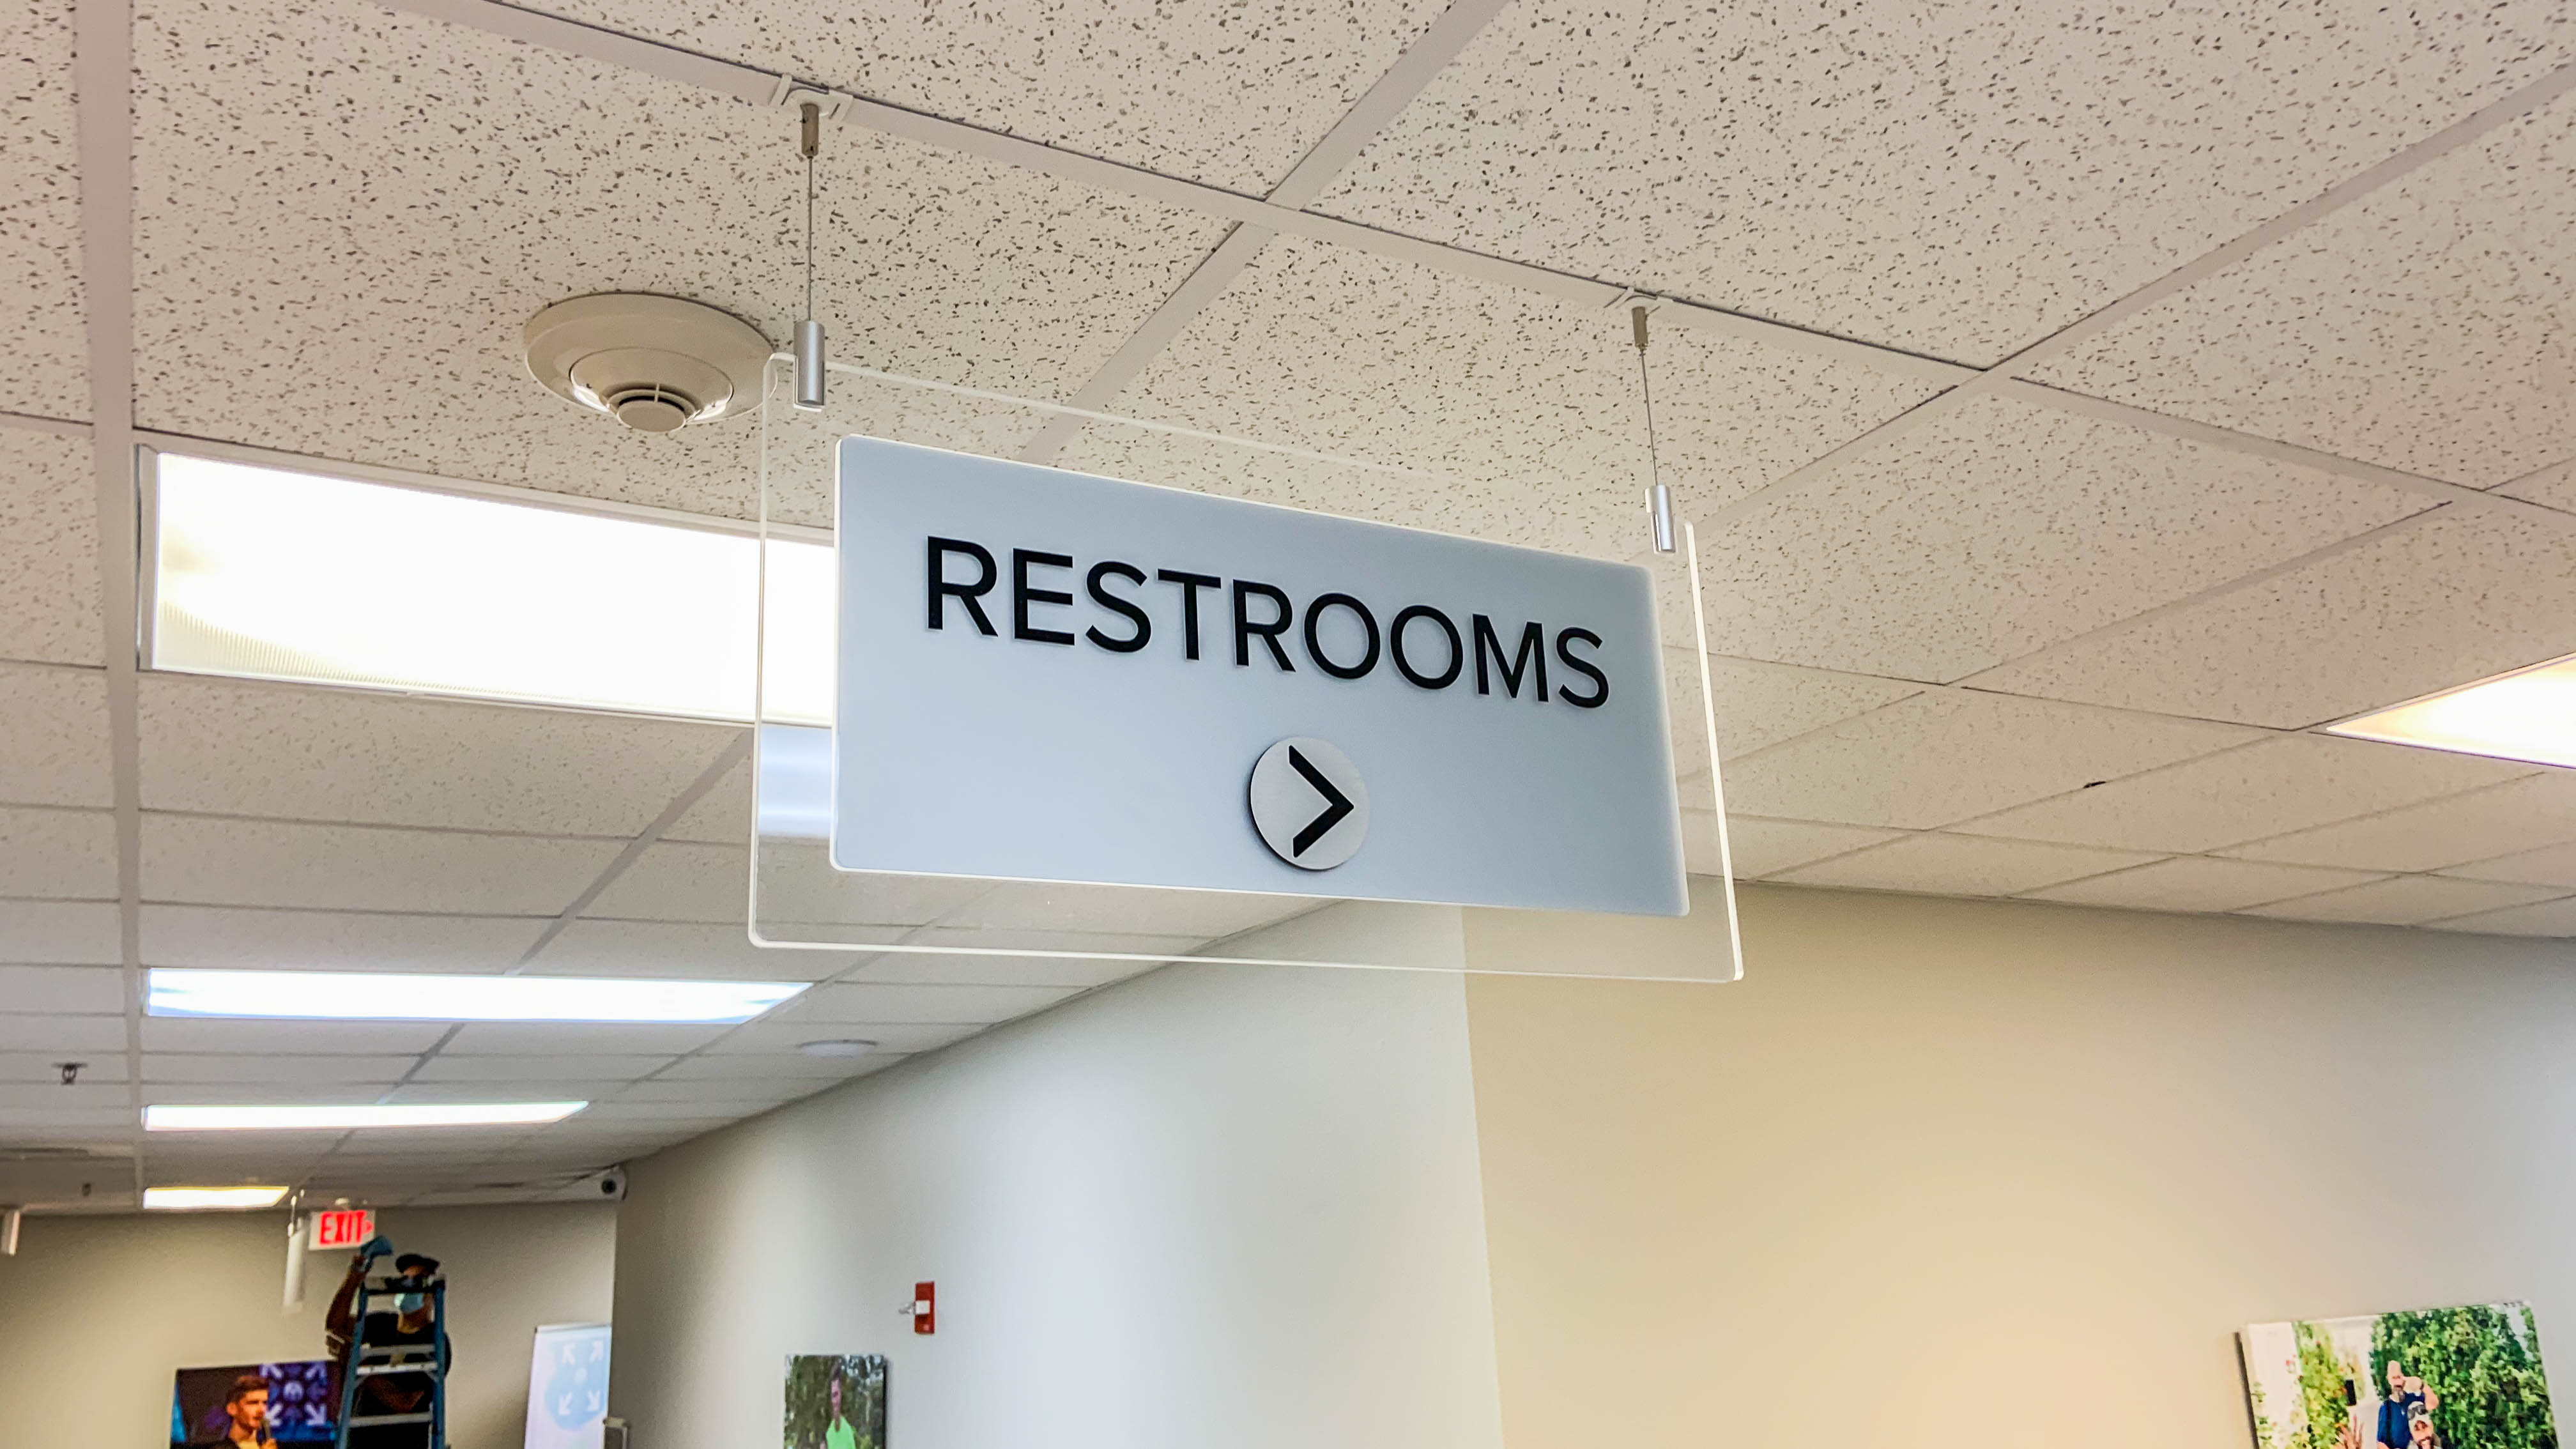 Acrylic restrooms signage 